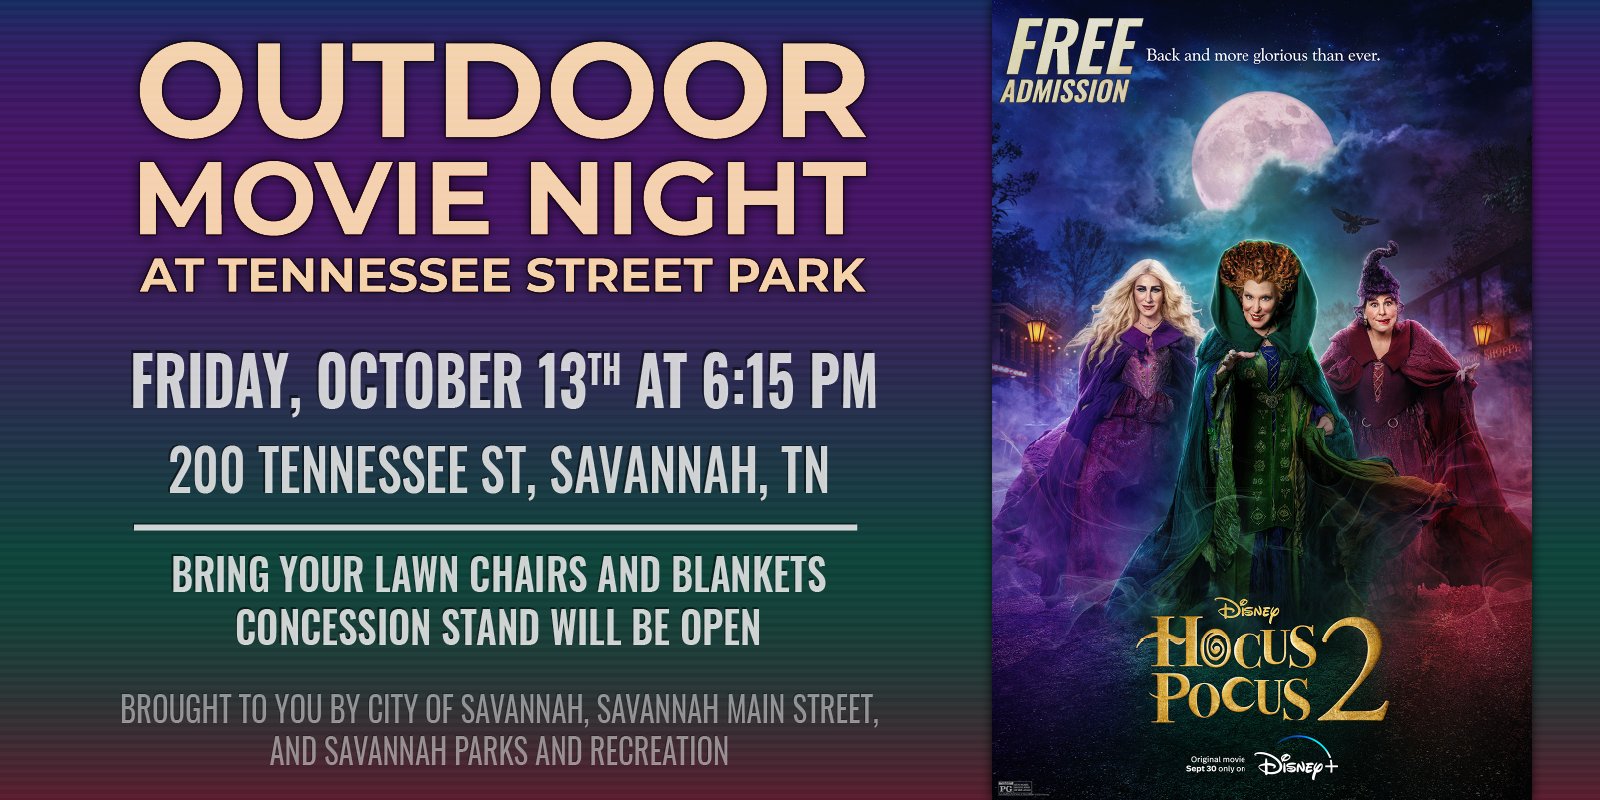 Outdoor Movie Night Friday, October 13th, 2023 Featuring Hocus Pocus 2 Tennessee Street Park, 200 Tennessee Street, Savannah, Tennessee Free Admission Bring your lawn chairs and blankets Concession stand will be open